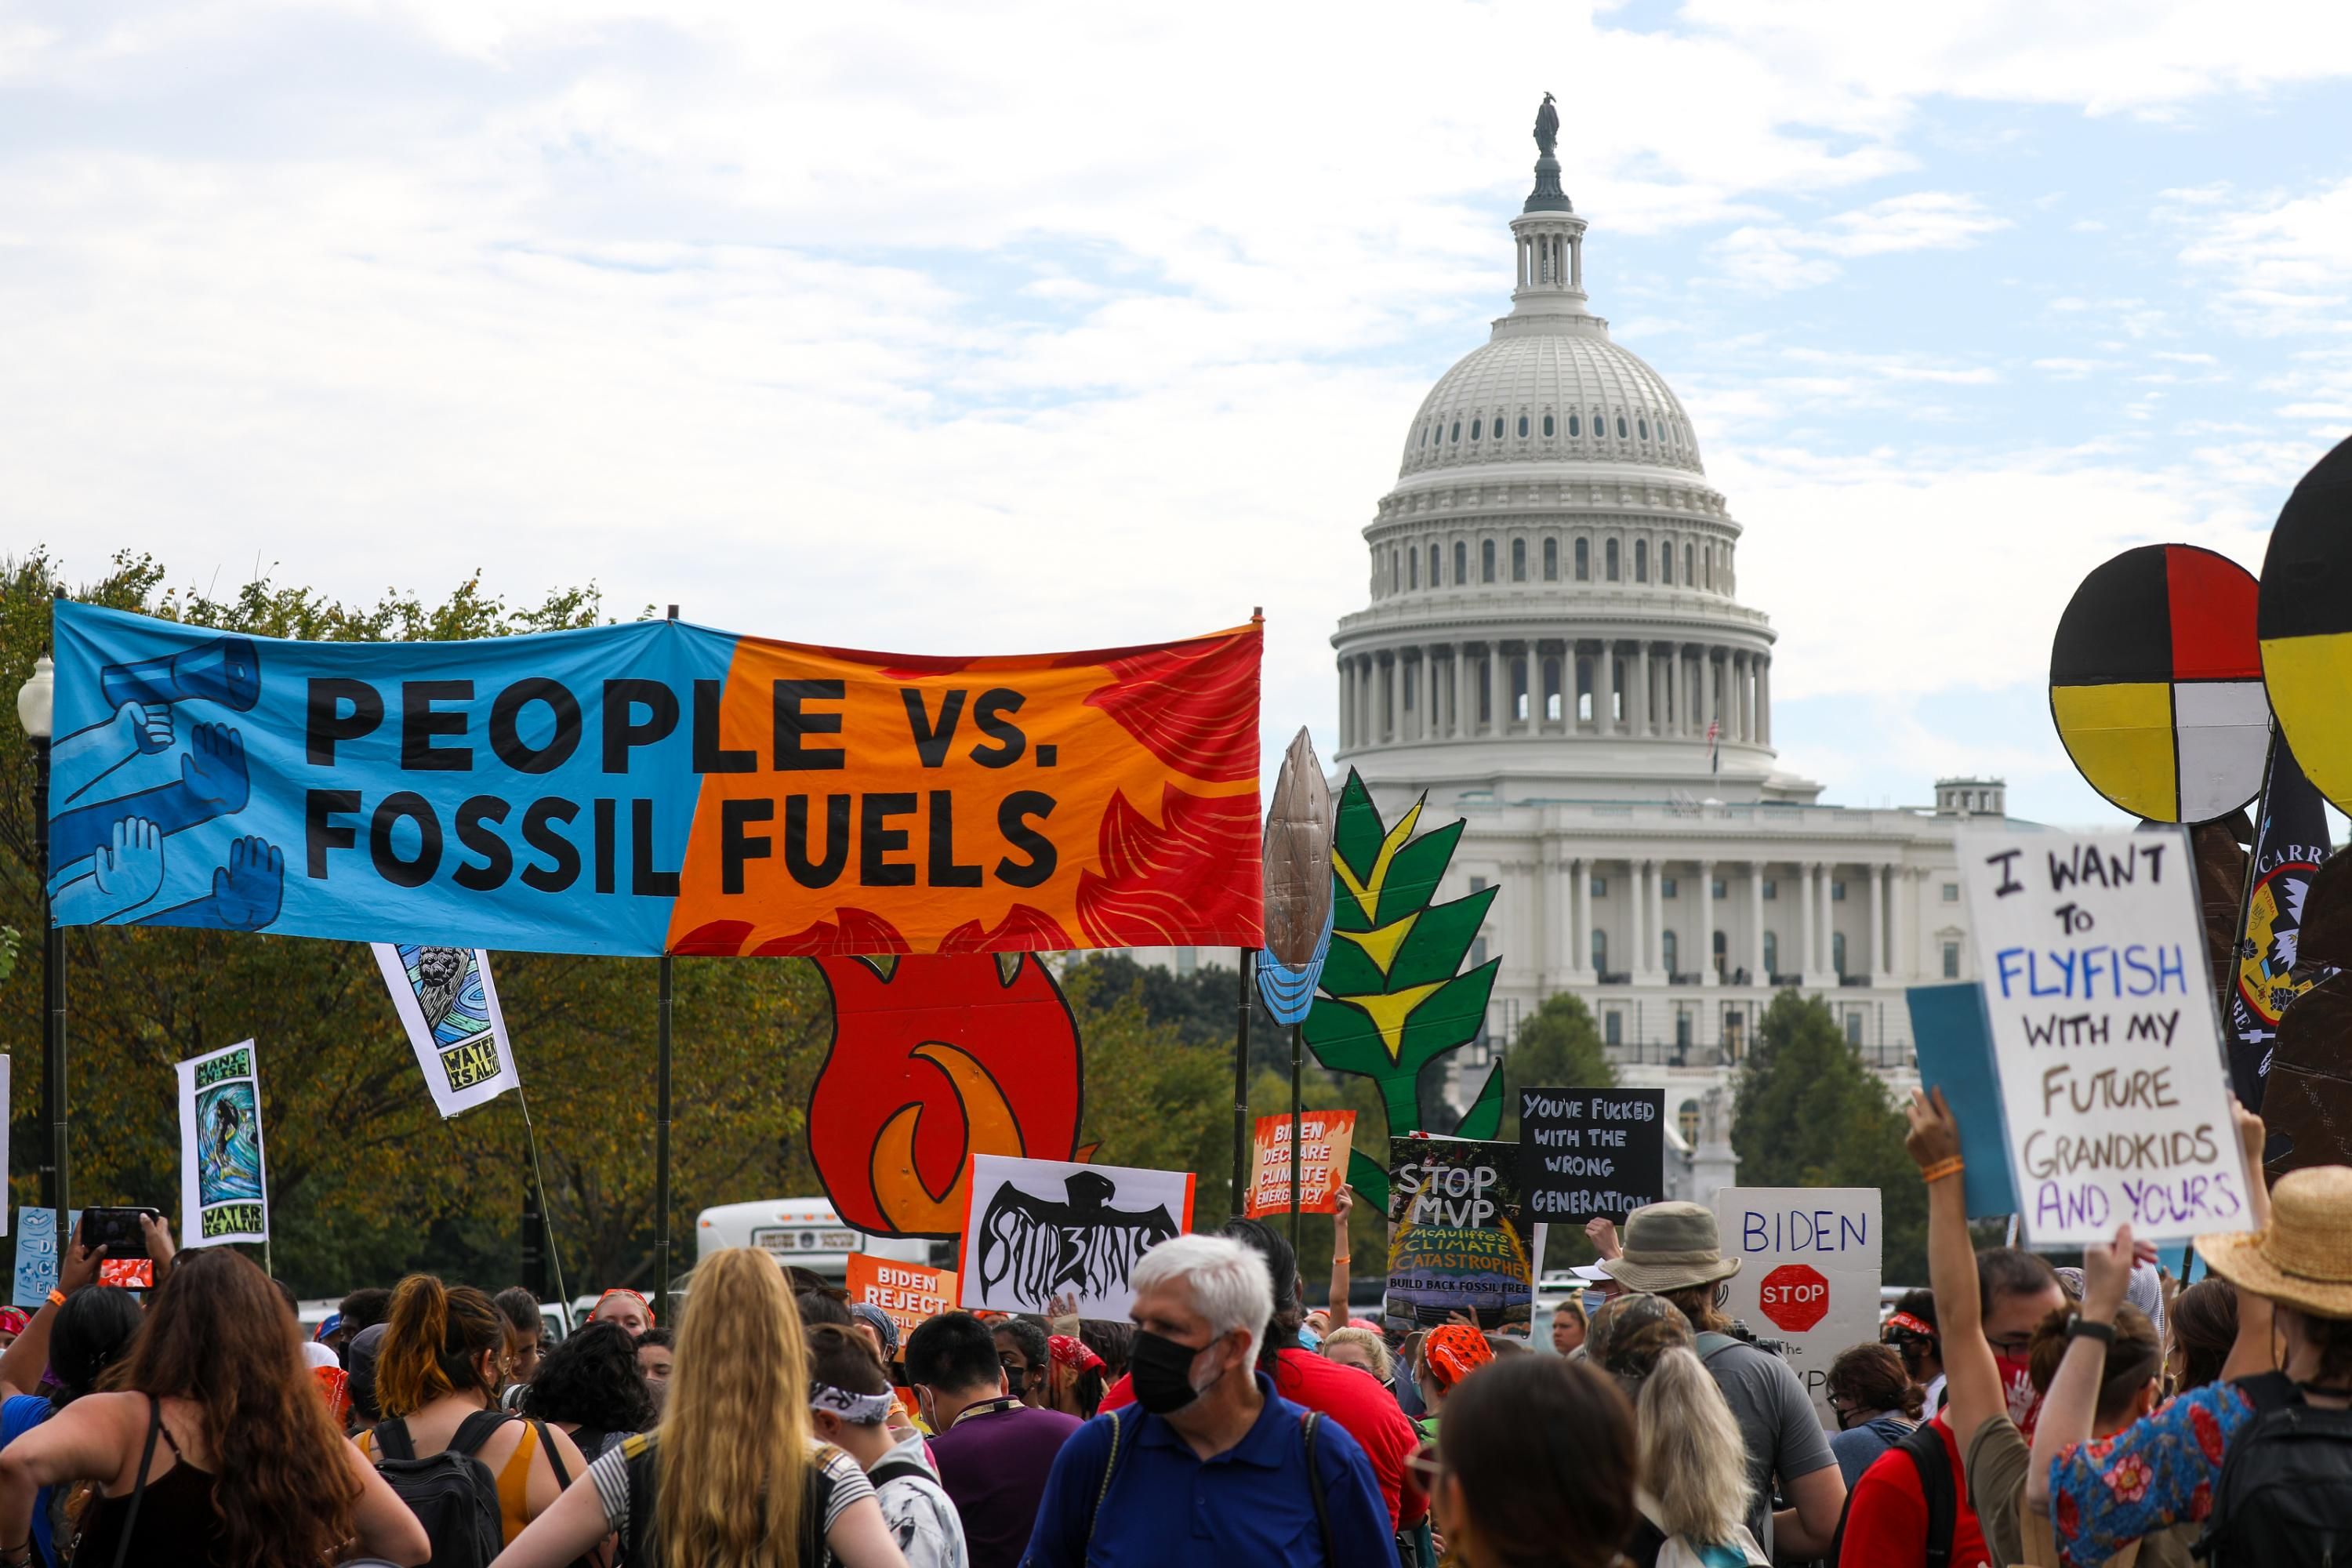 Demonstrators protest fossil fuels in Washington, D.C. 